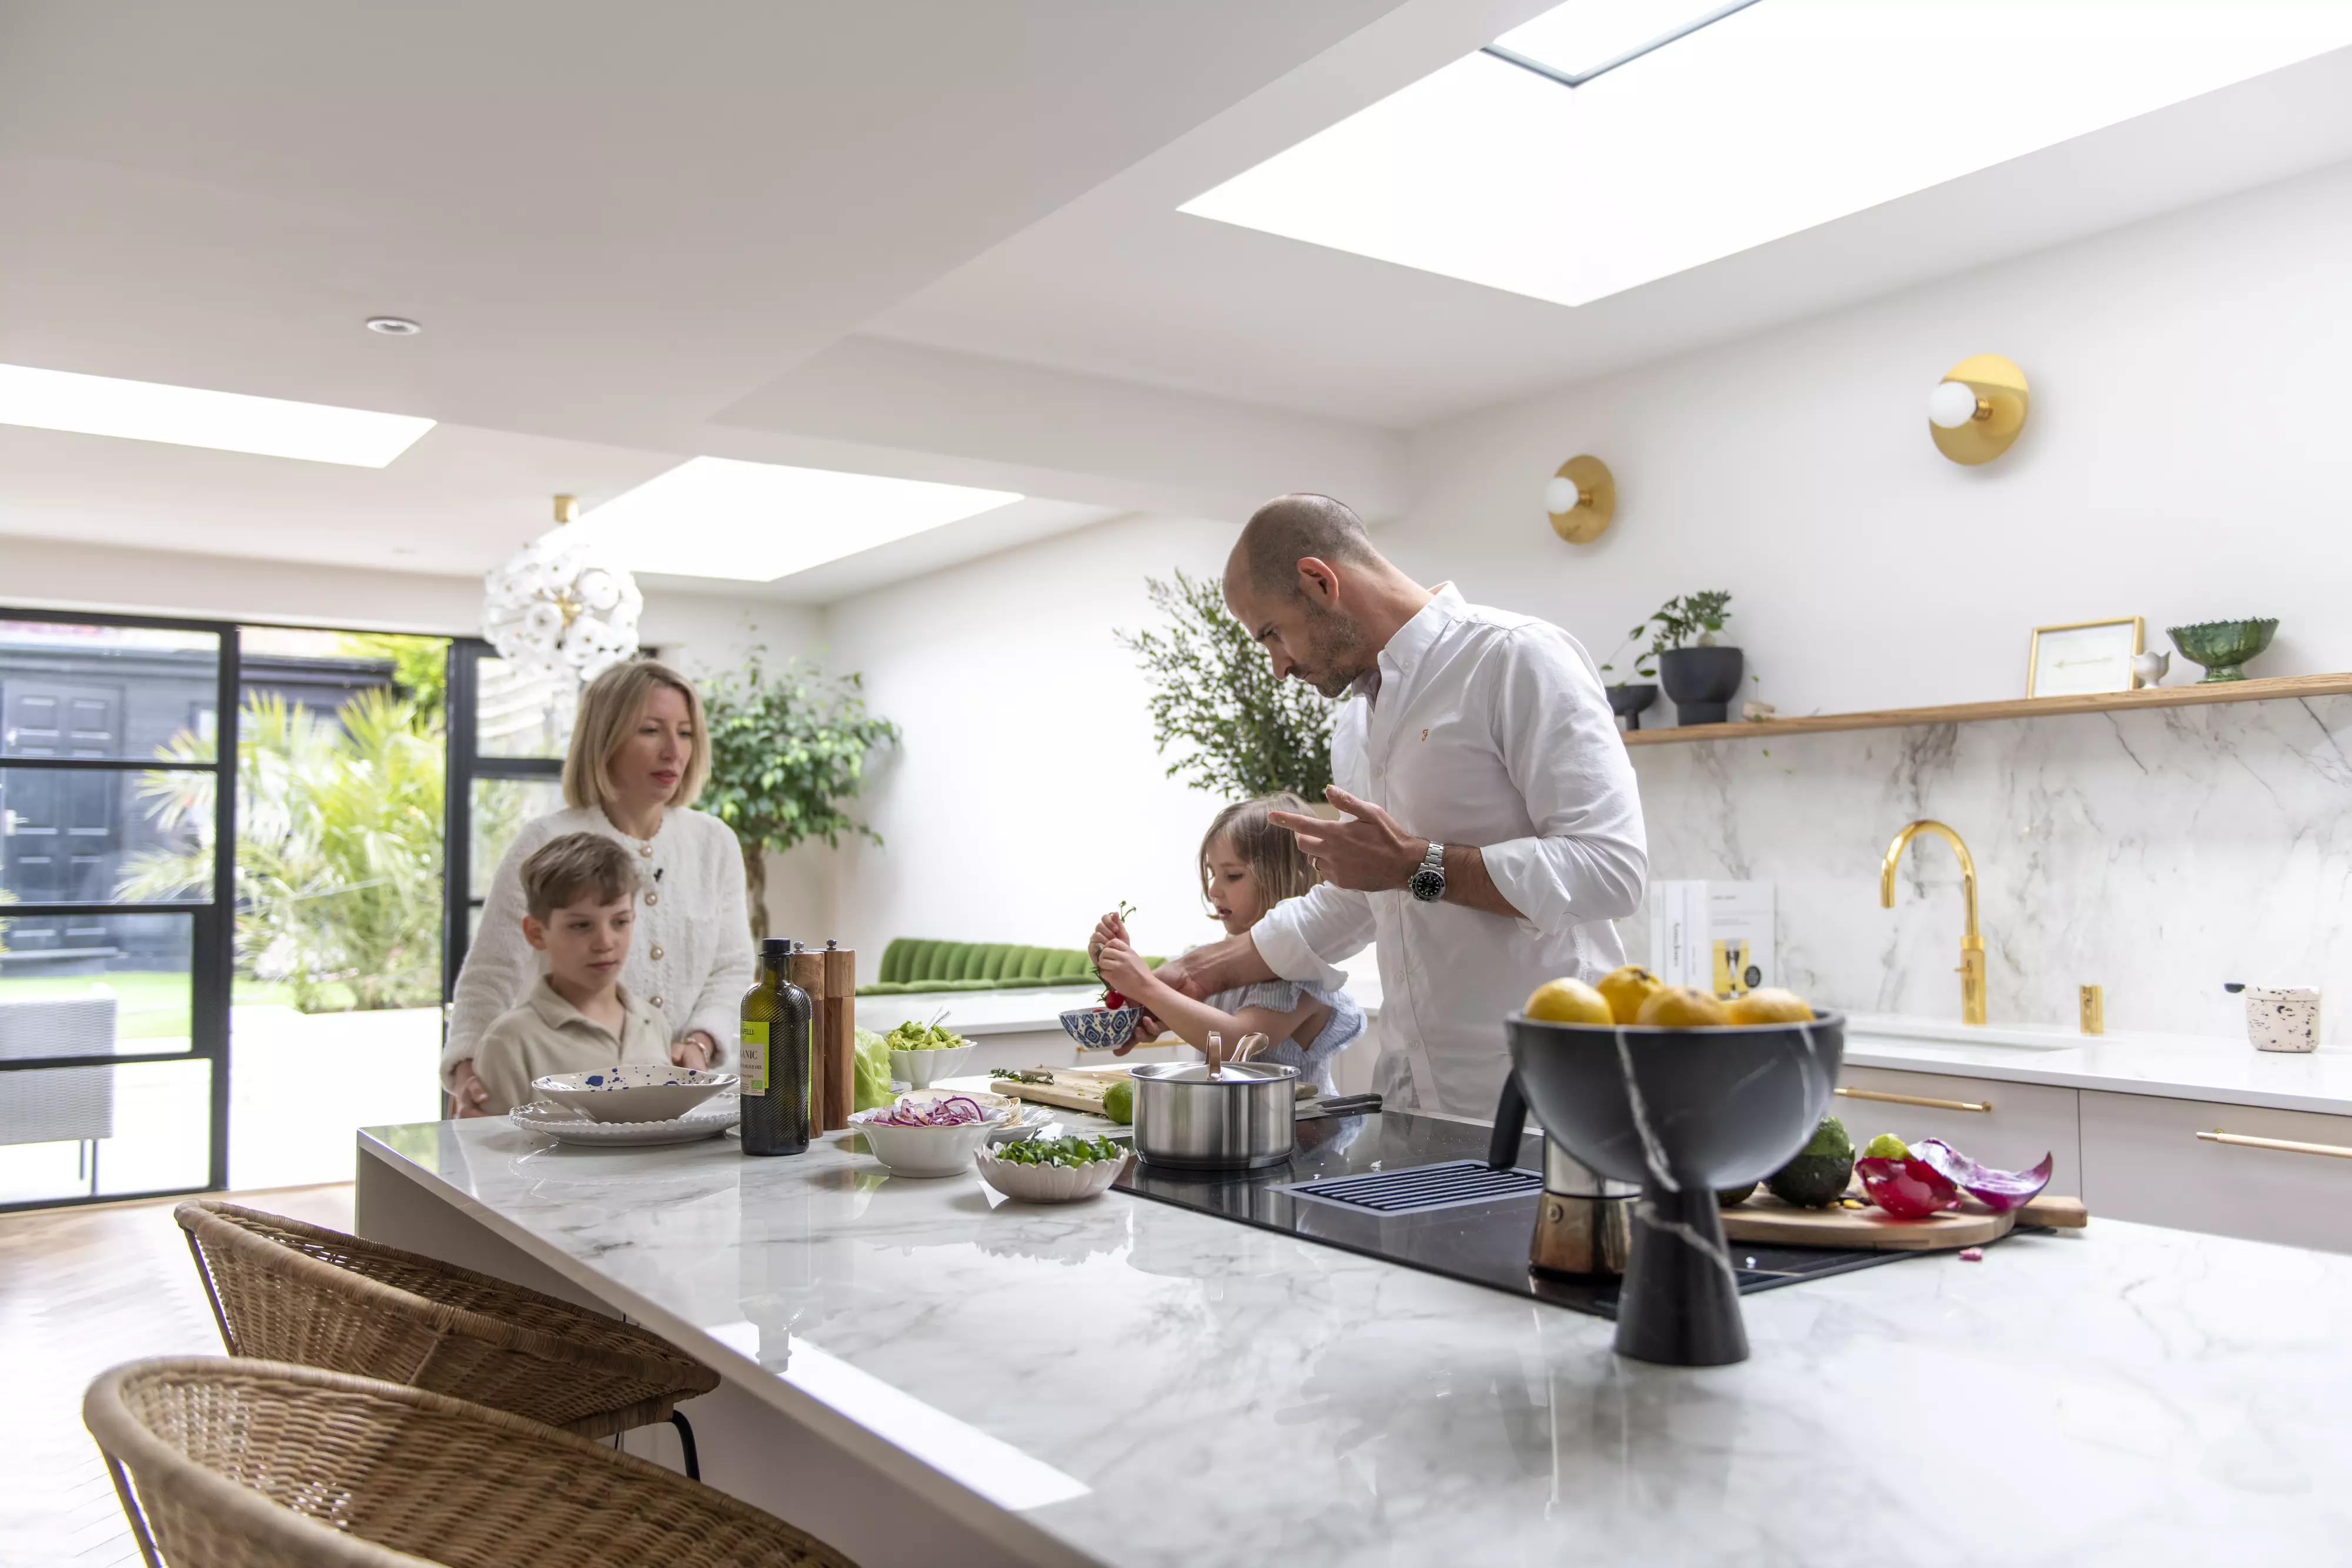 Modern kitchen with family cooking, natural light from VELUX skylight.